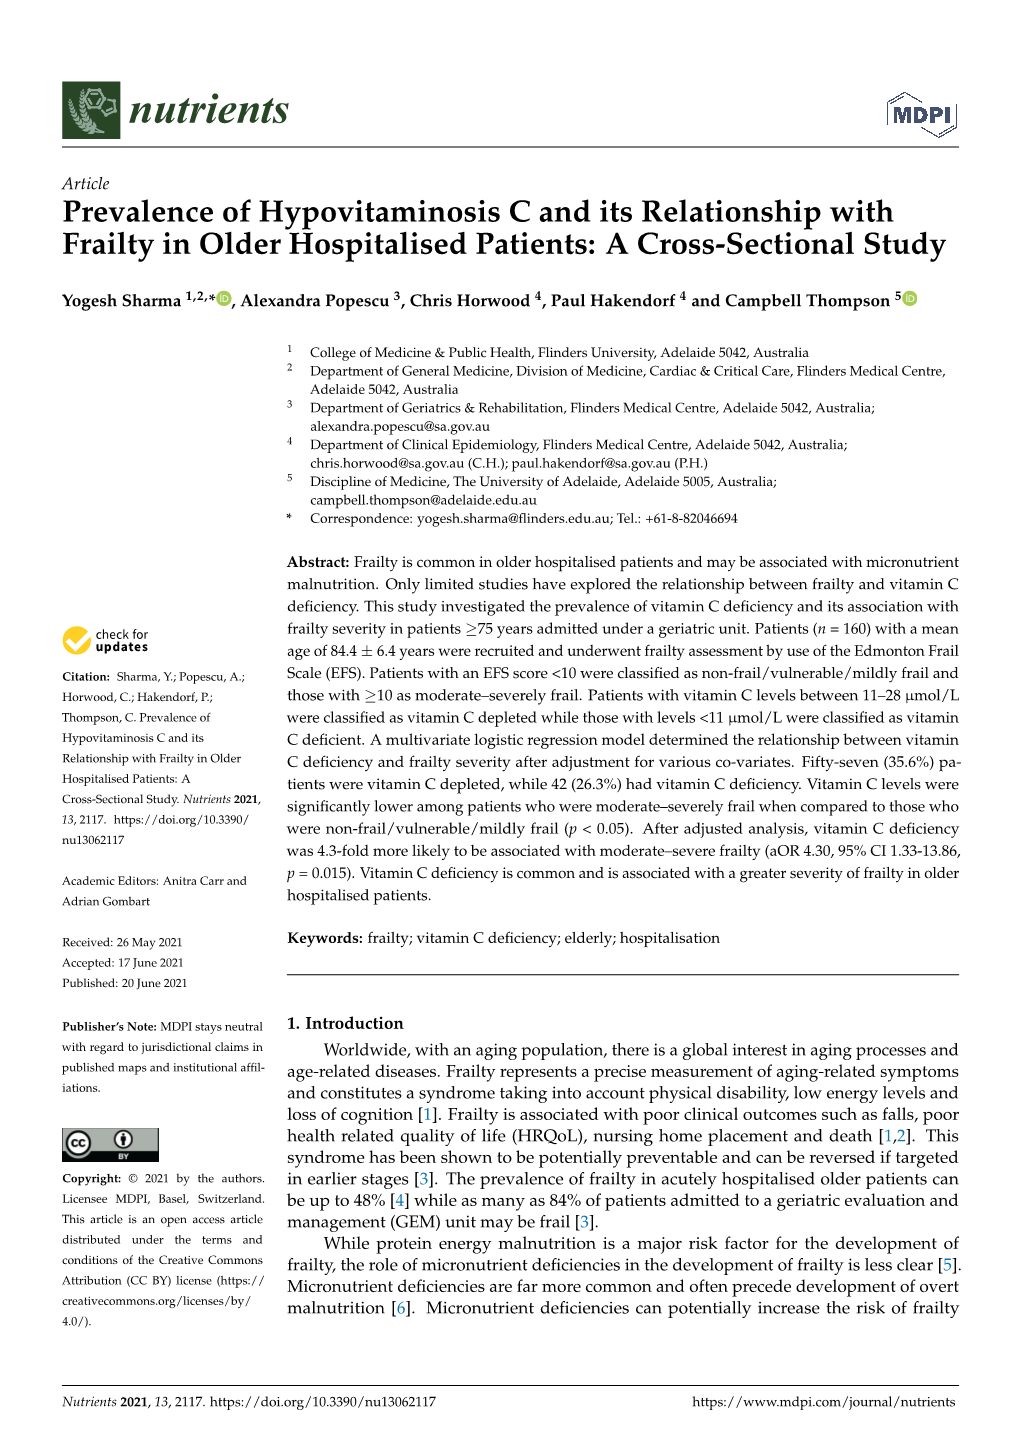 Prevalence of Hypovitaminosis C and Its Relationship with Frailty in Older Hospitalised Patients: a Cross-Sectional Study